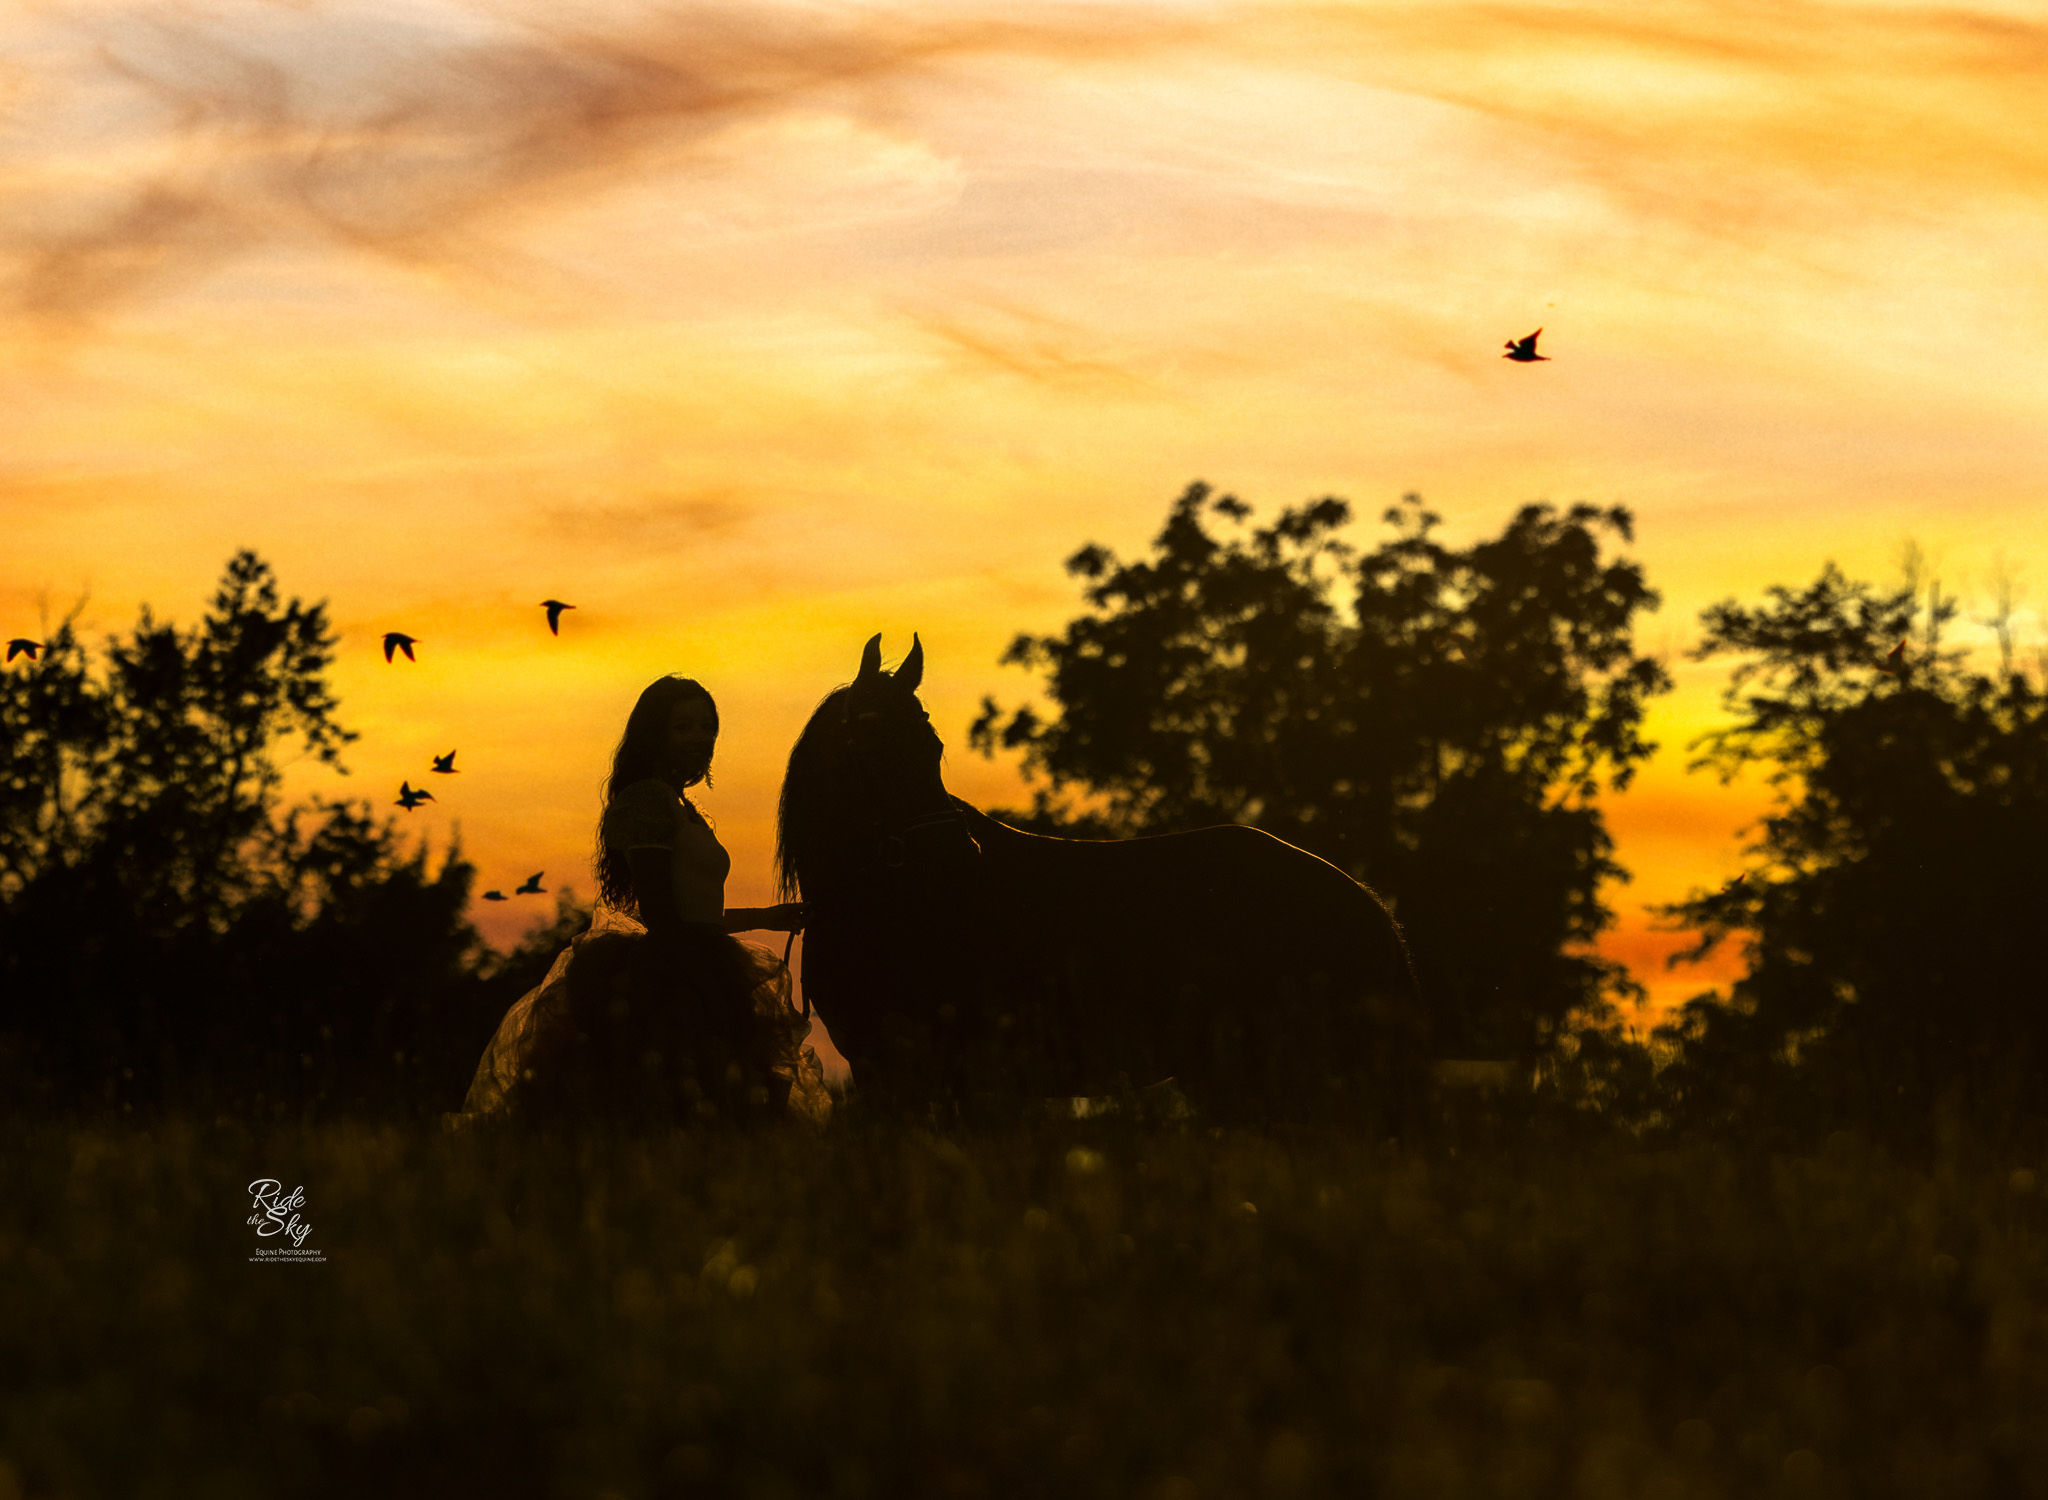 High School Senior Equestrian and her horse in silhouette at sunset